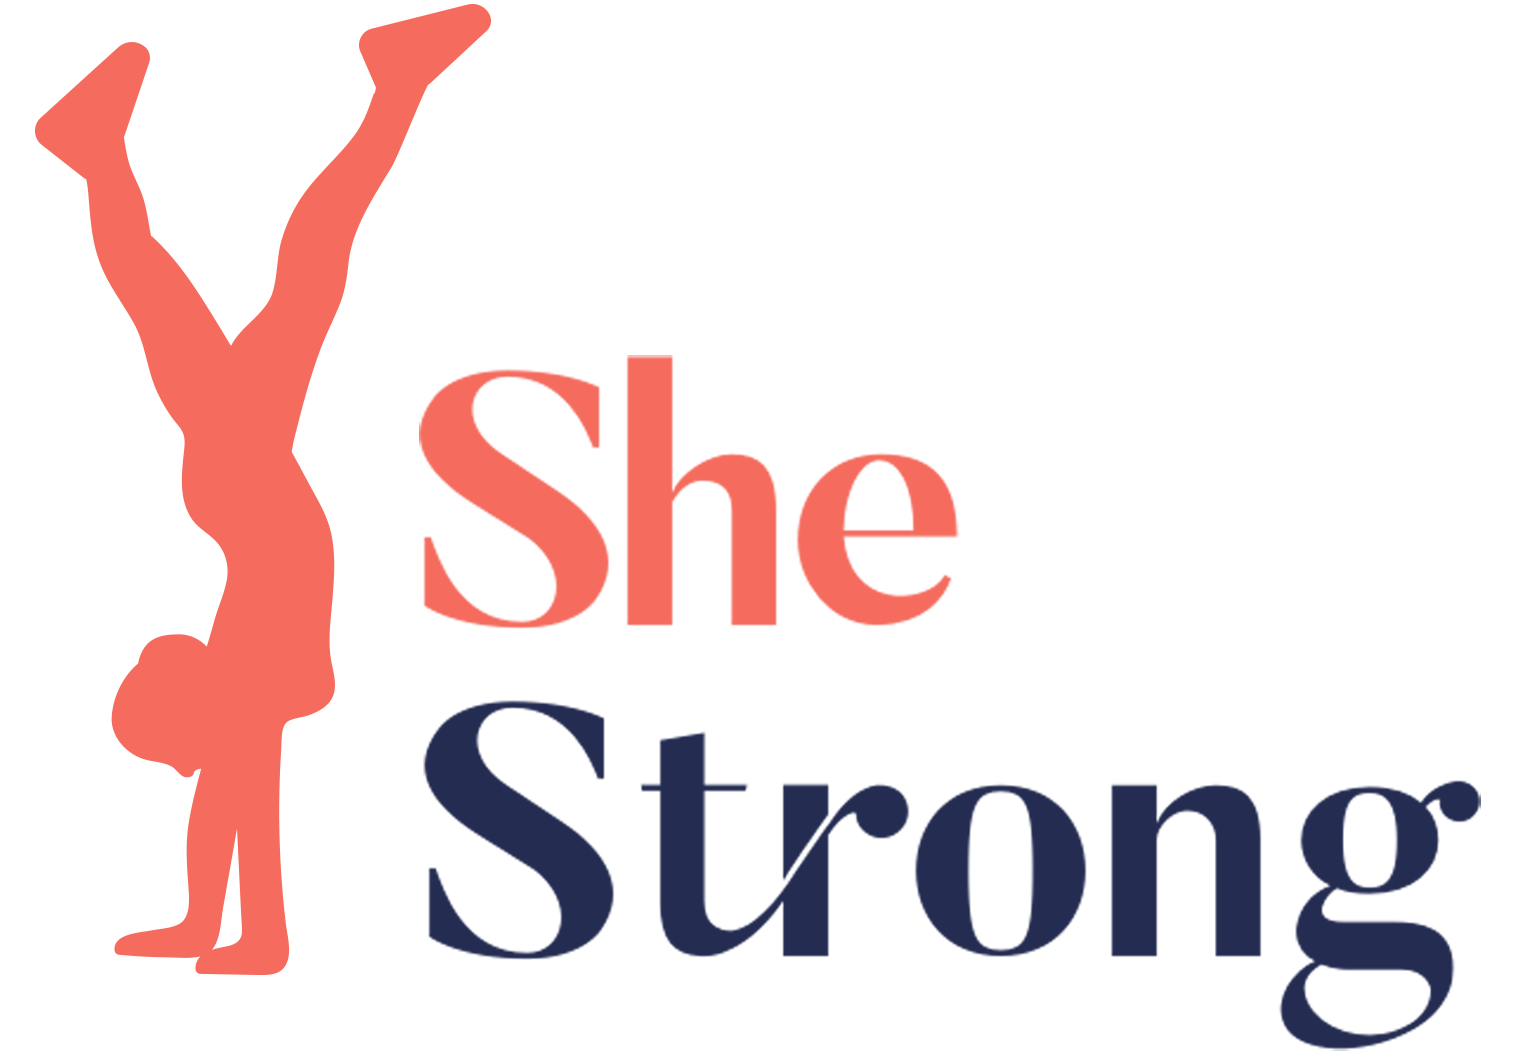 She Strong